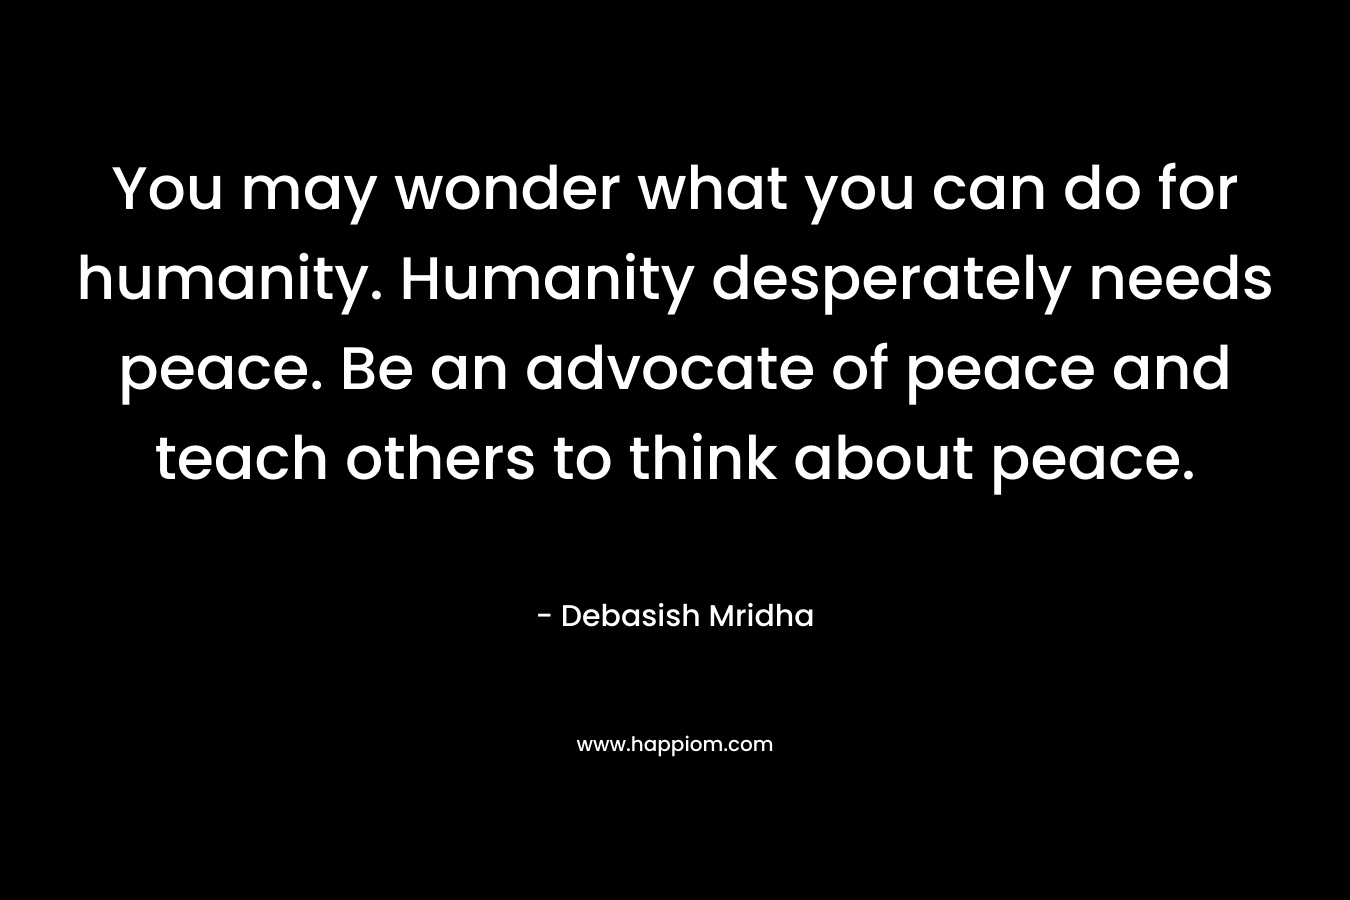 You may wonder what you can do for humanity. Humanity desperately needs peace. Be an advocate of peace and teach others to think about peace.